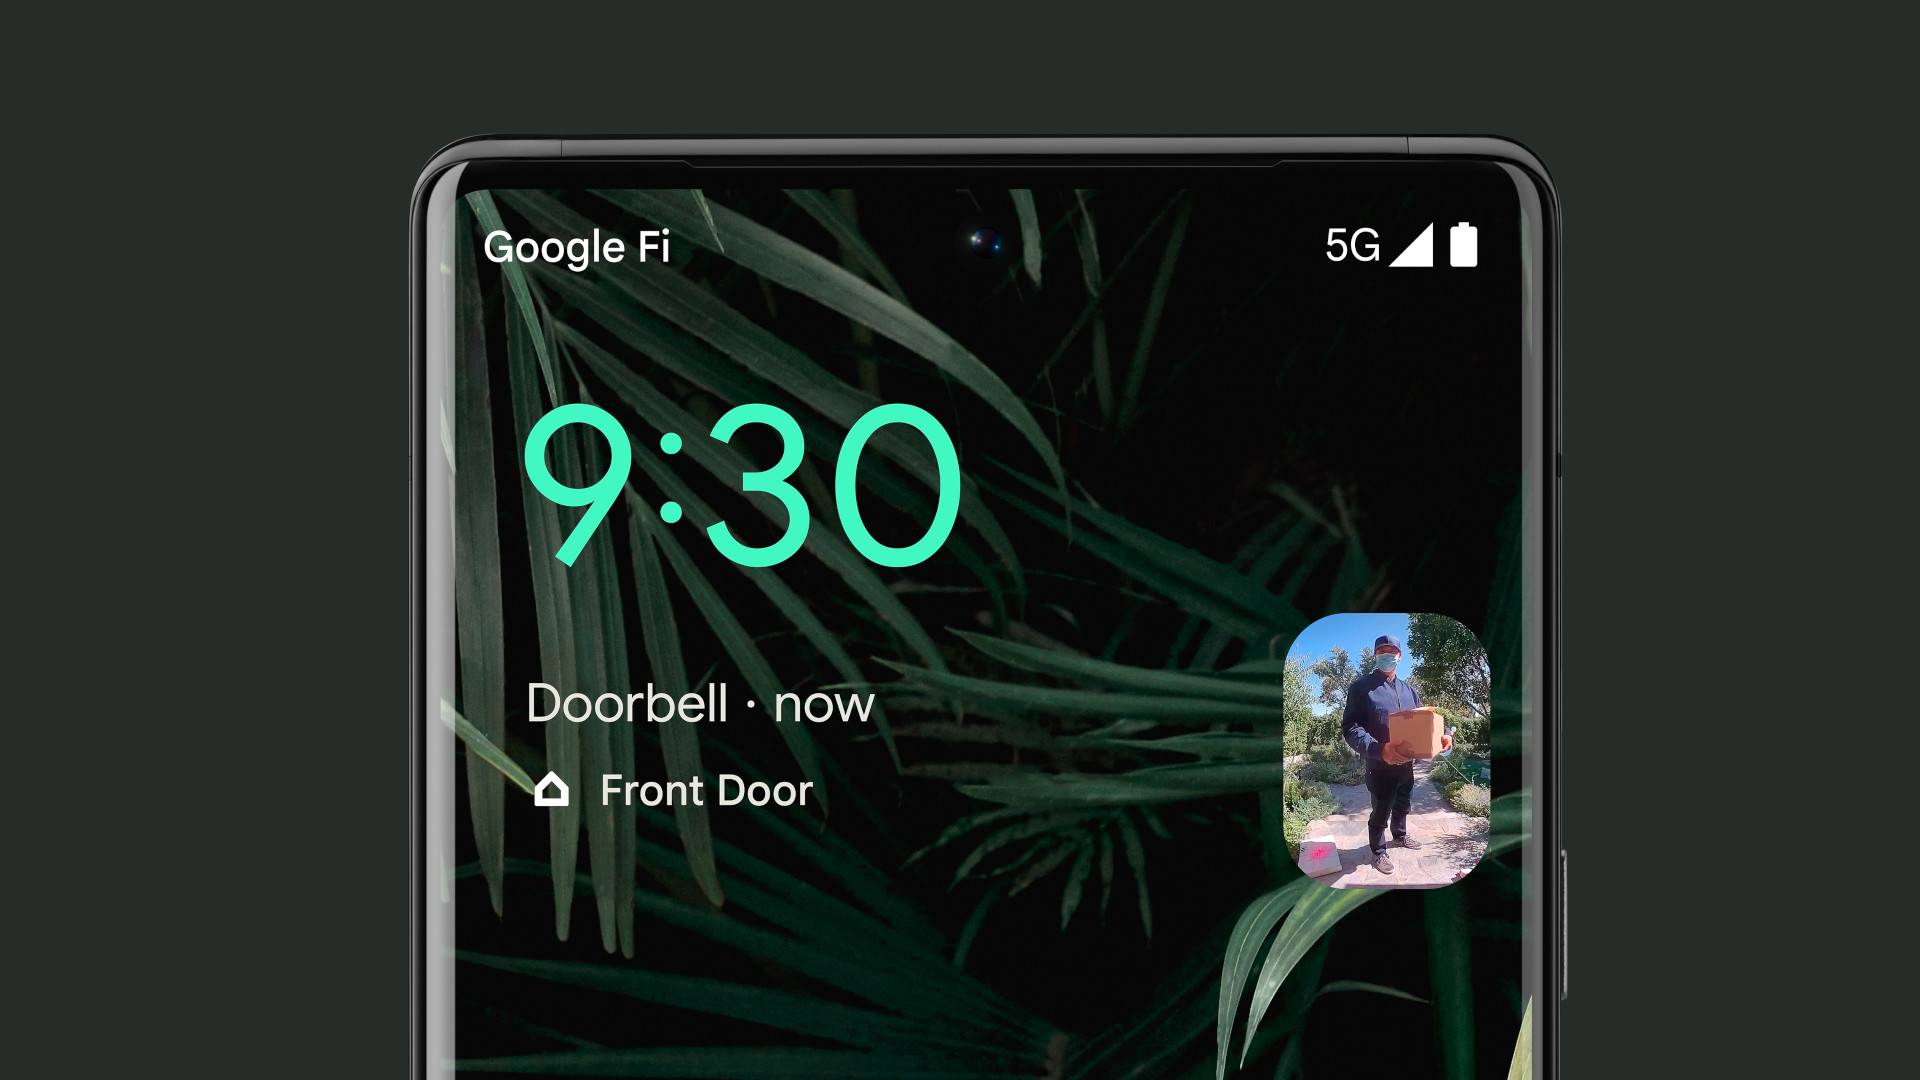 Nest Doorbell video feeds are now viewable in At a Glance on Pixels